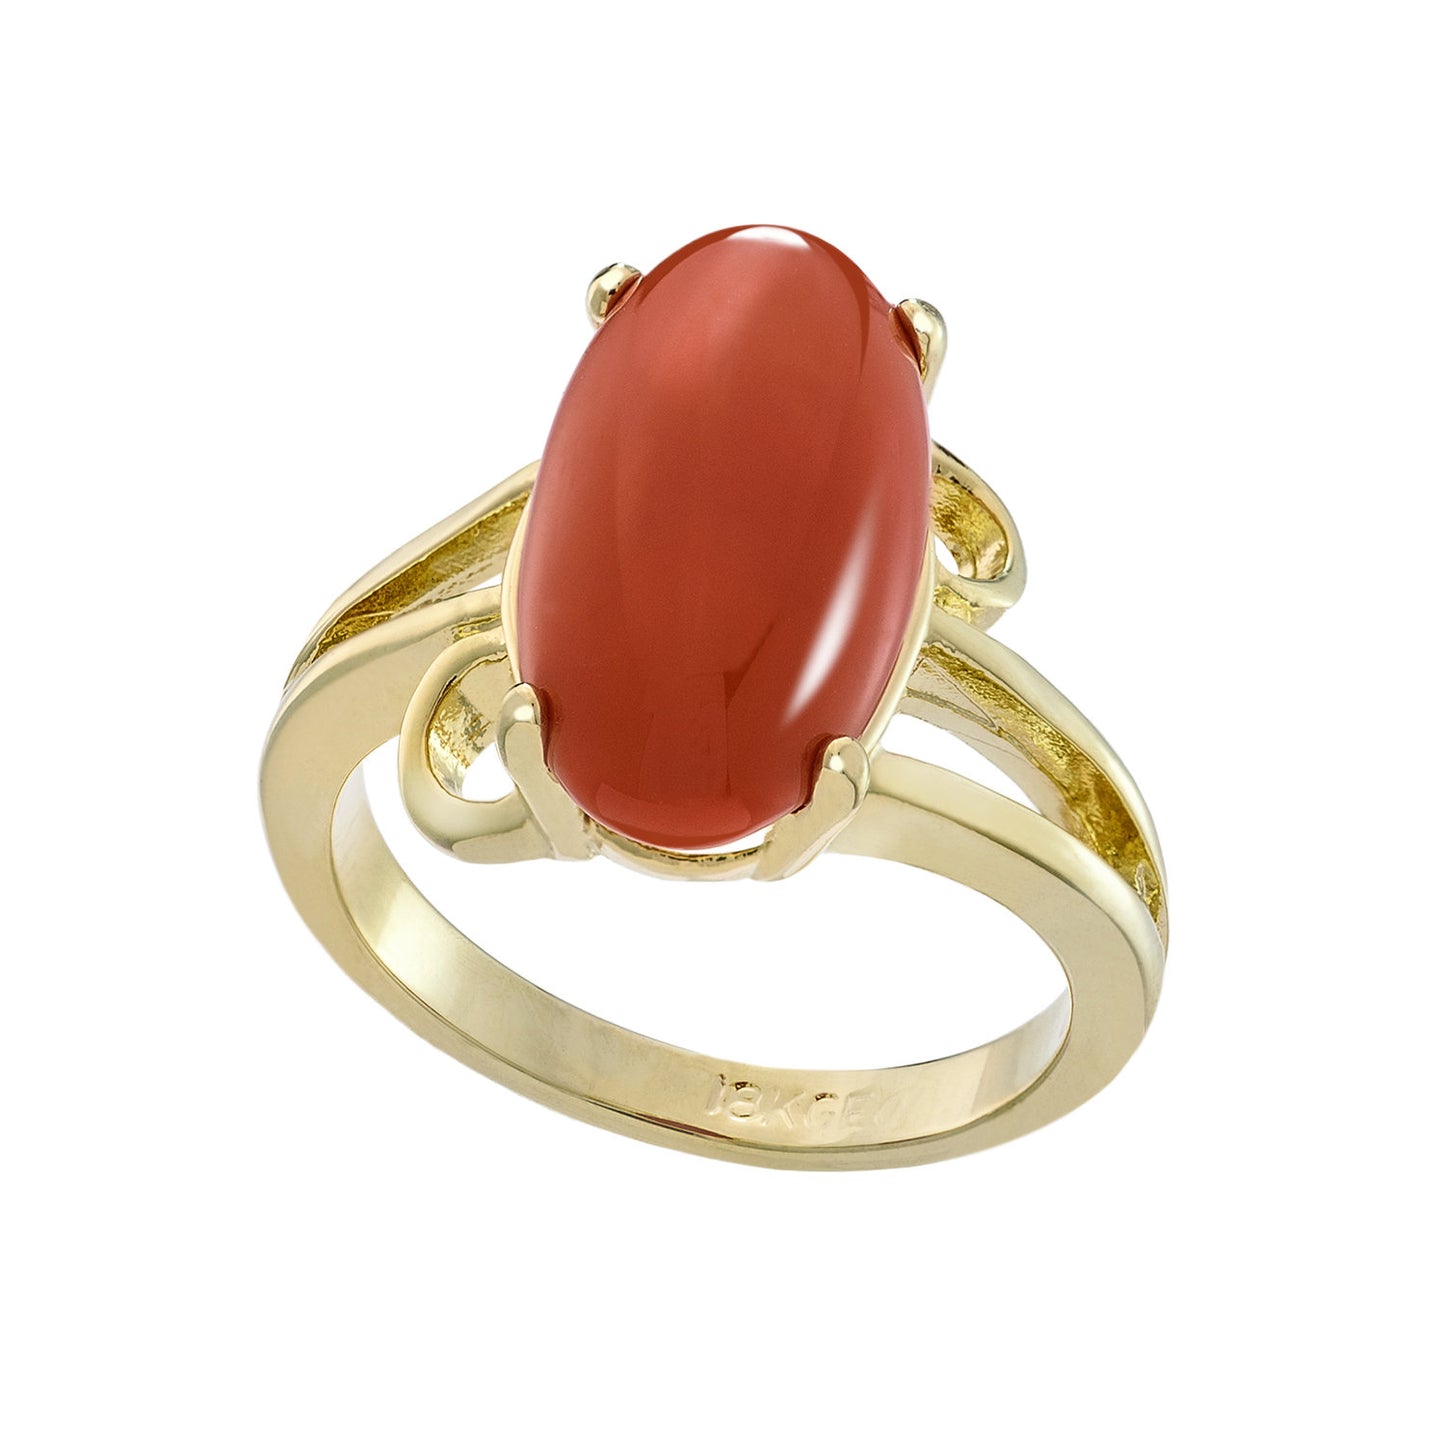 vintage-imitation-coral-gold-plated-cocktail-ring